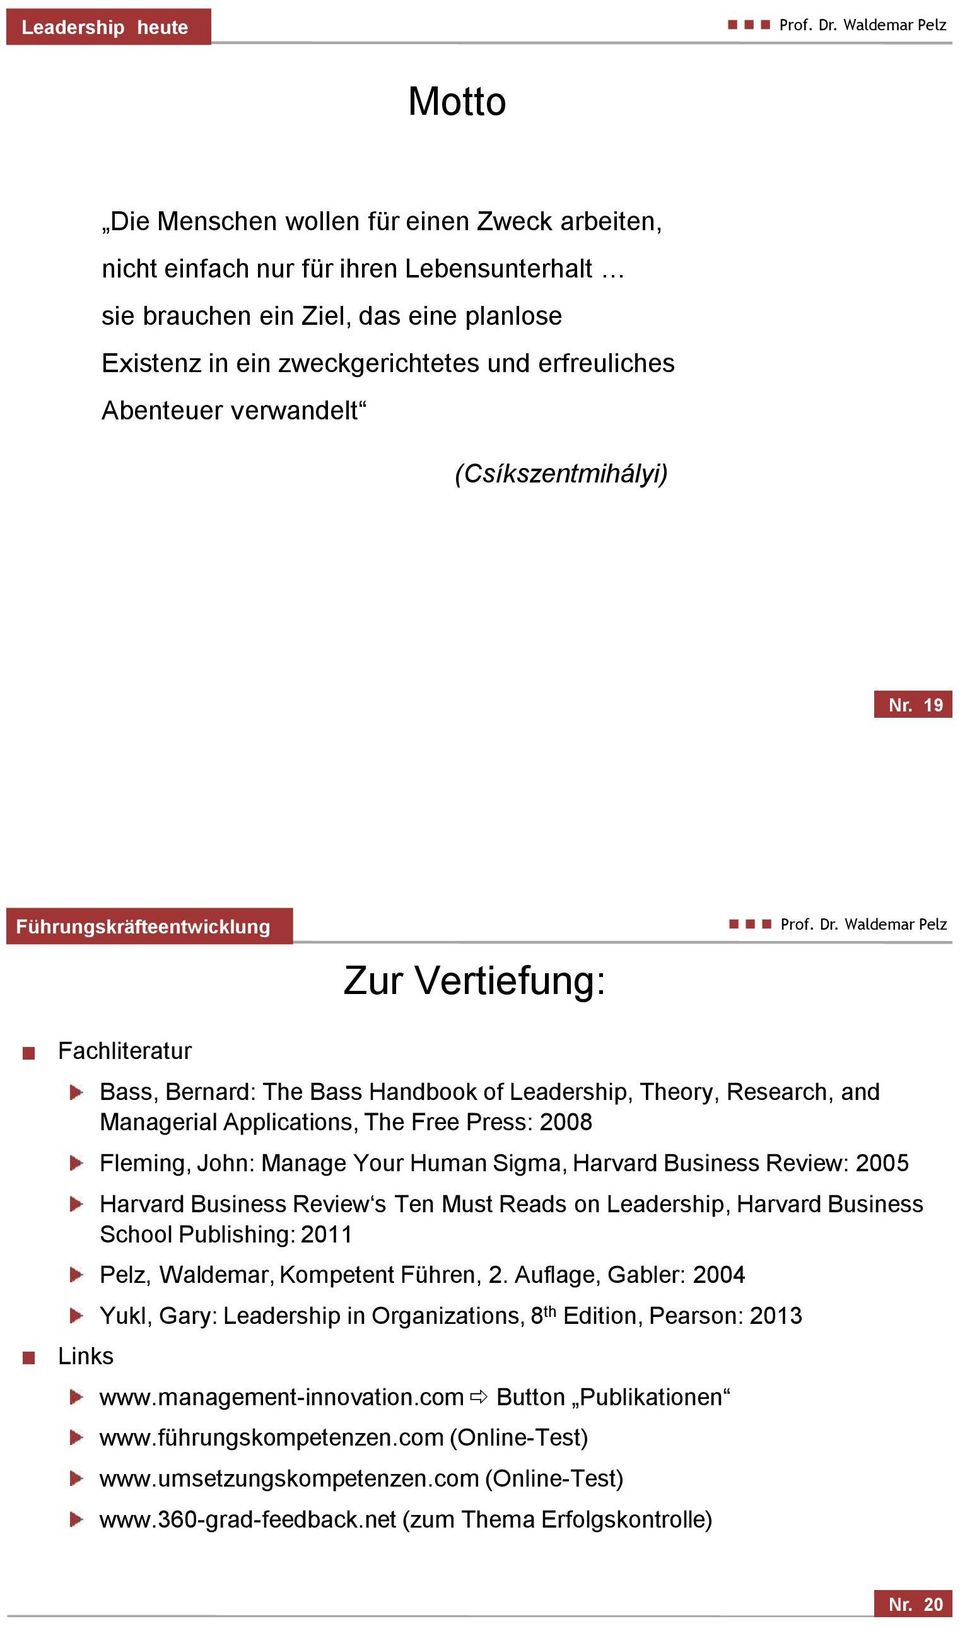 19 Zur Vertiefung: Fachliteratur Links Bass, Bernard: The Bass Handbook of Leadership, Theory, Research, and Managerial Applications, The Free Press: 2008 Fleming, John: Manage Your Human Sigma,